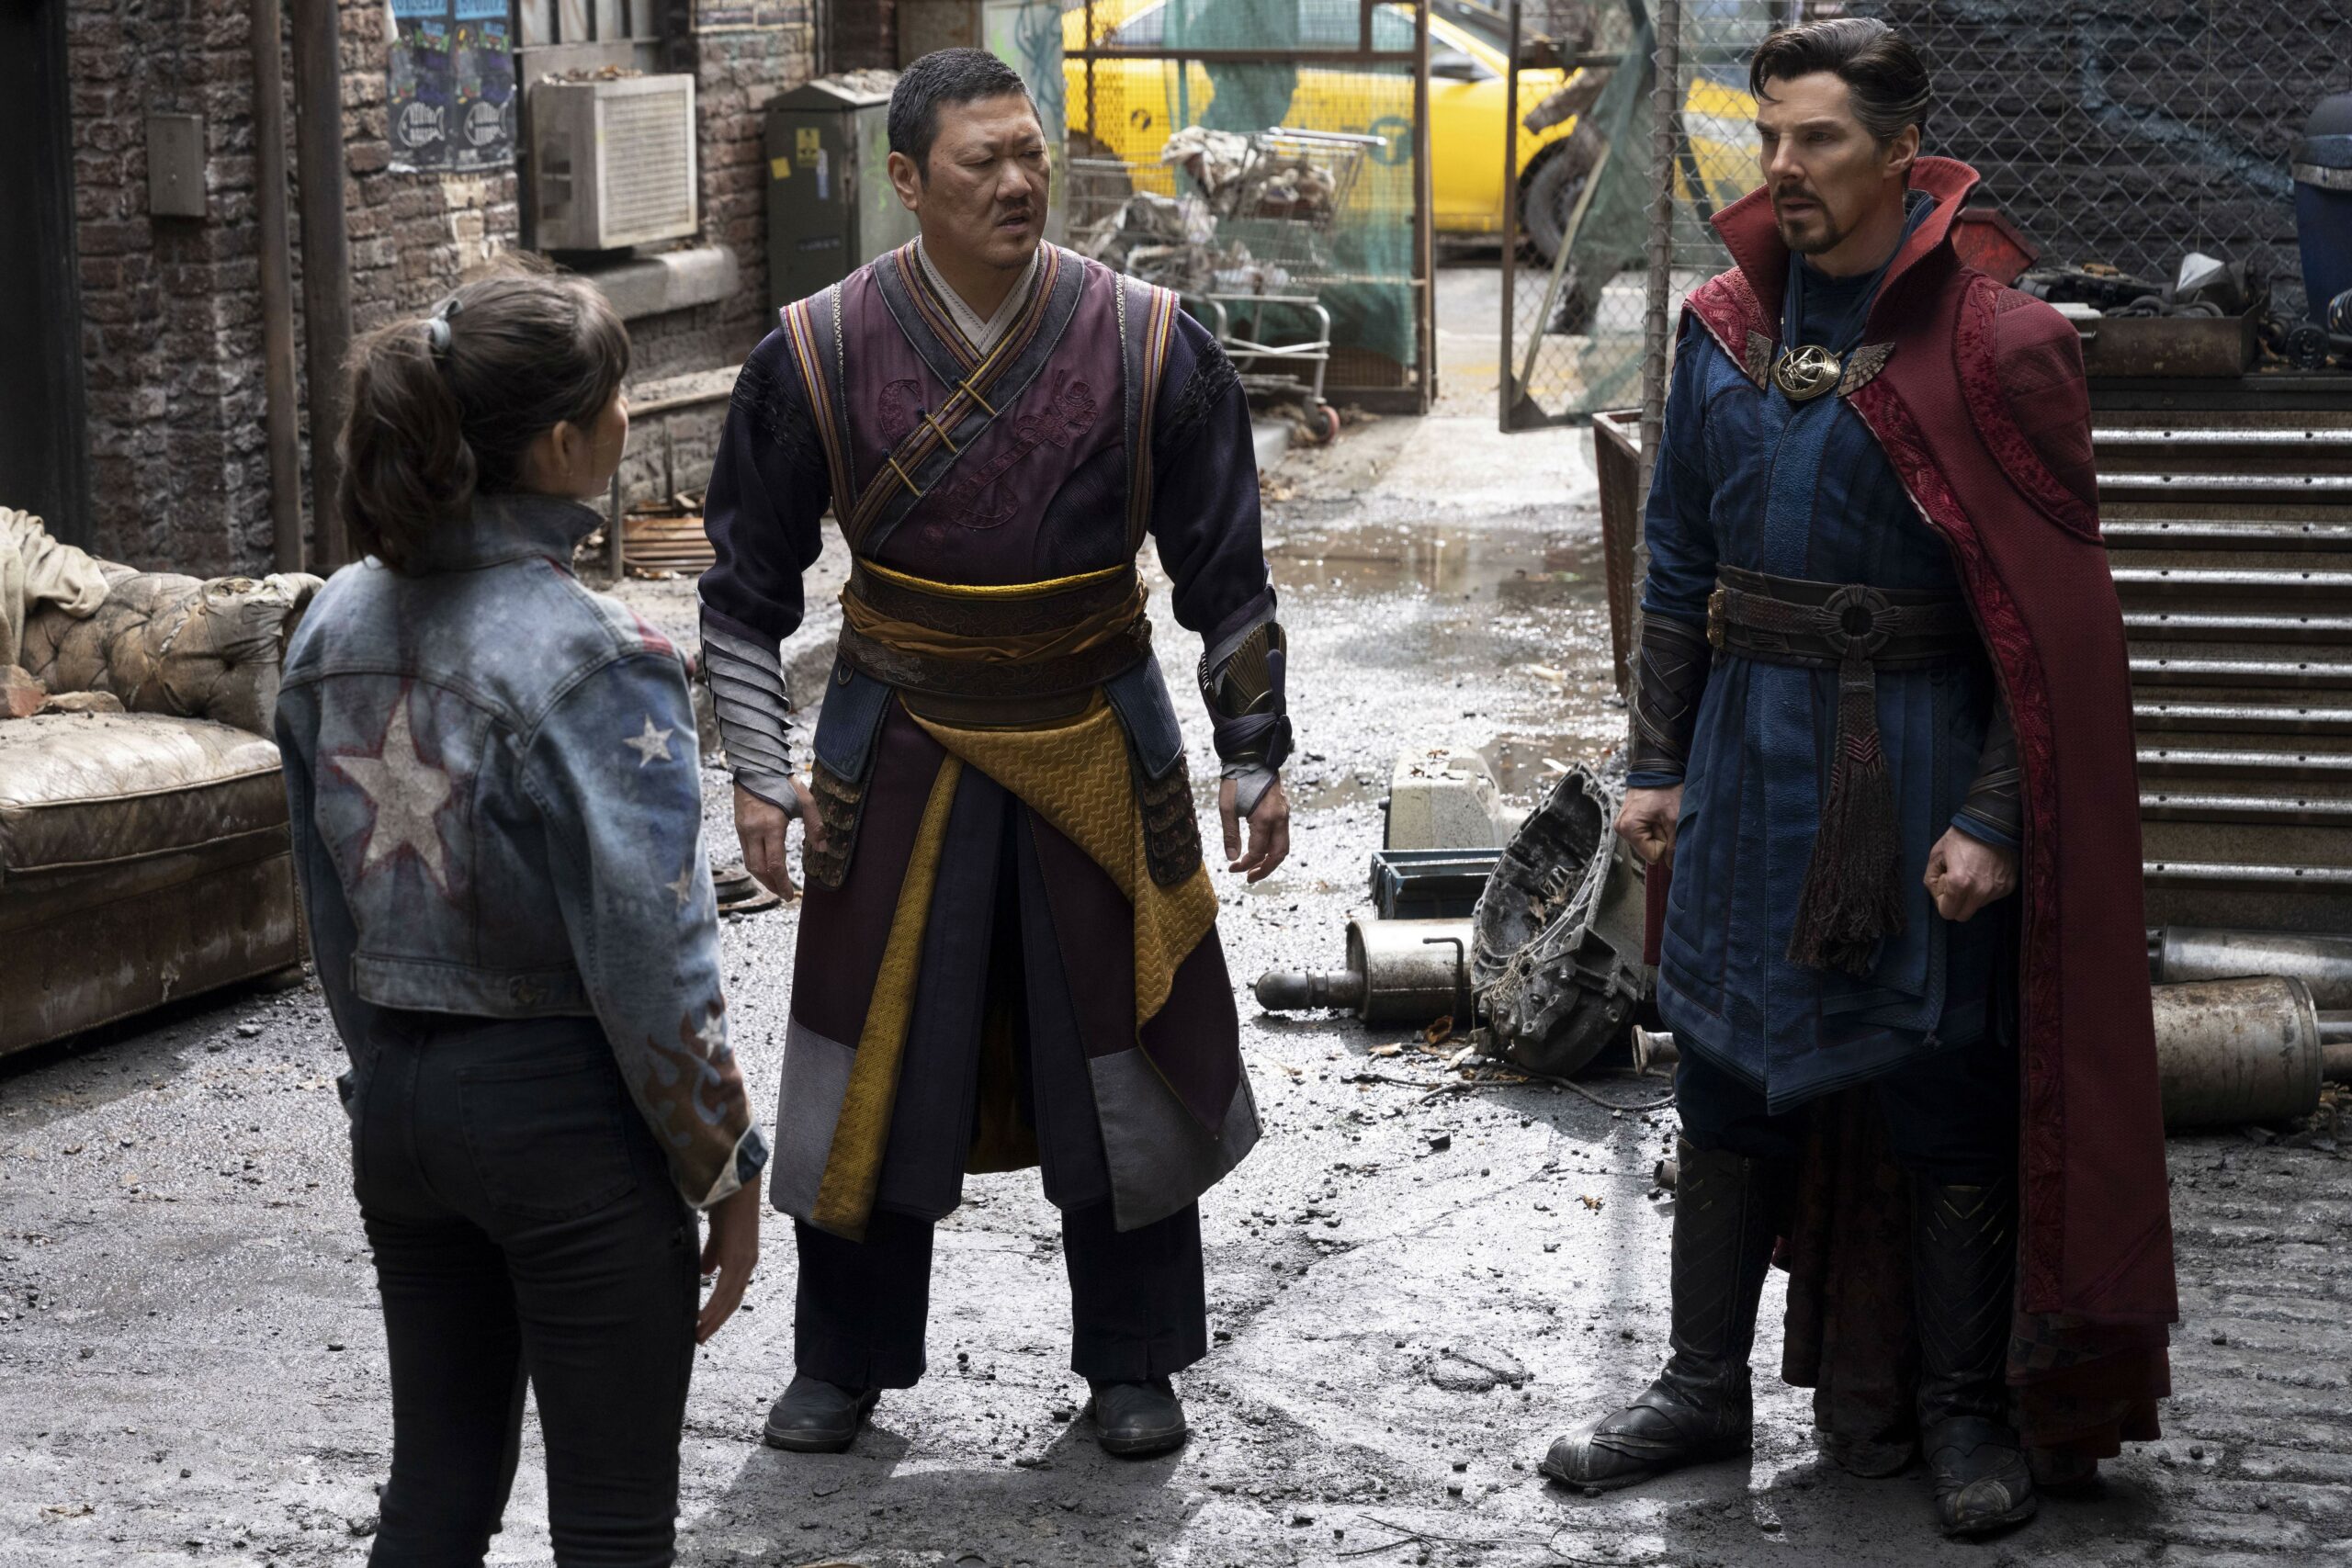 Dr. Strange (Benedict Cumberbatch), Wong (Benedict Wong), and America Chavez (Xochitl Gomez) in Doctor Strange in the Multiverse of Madness.